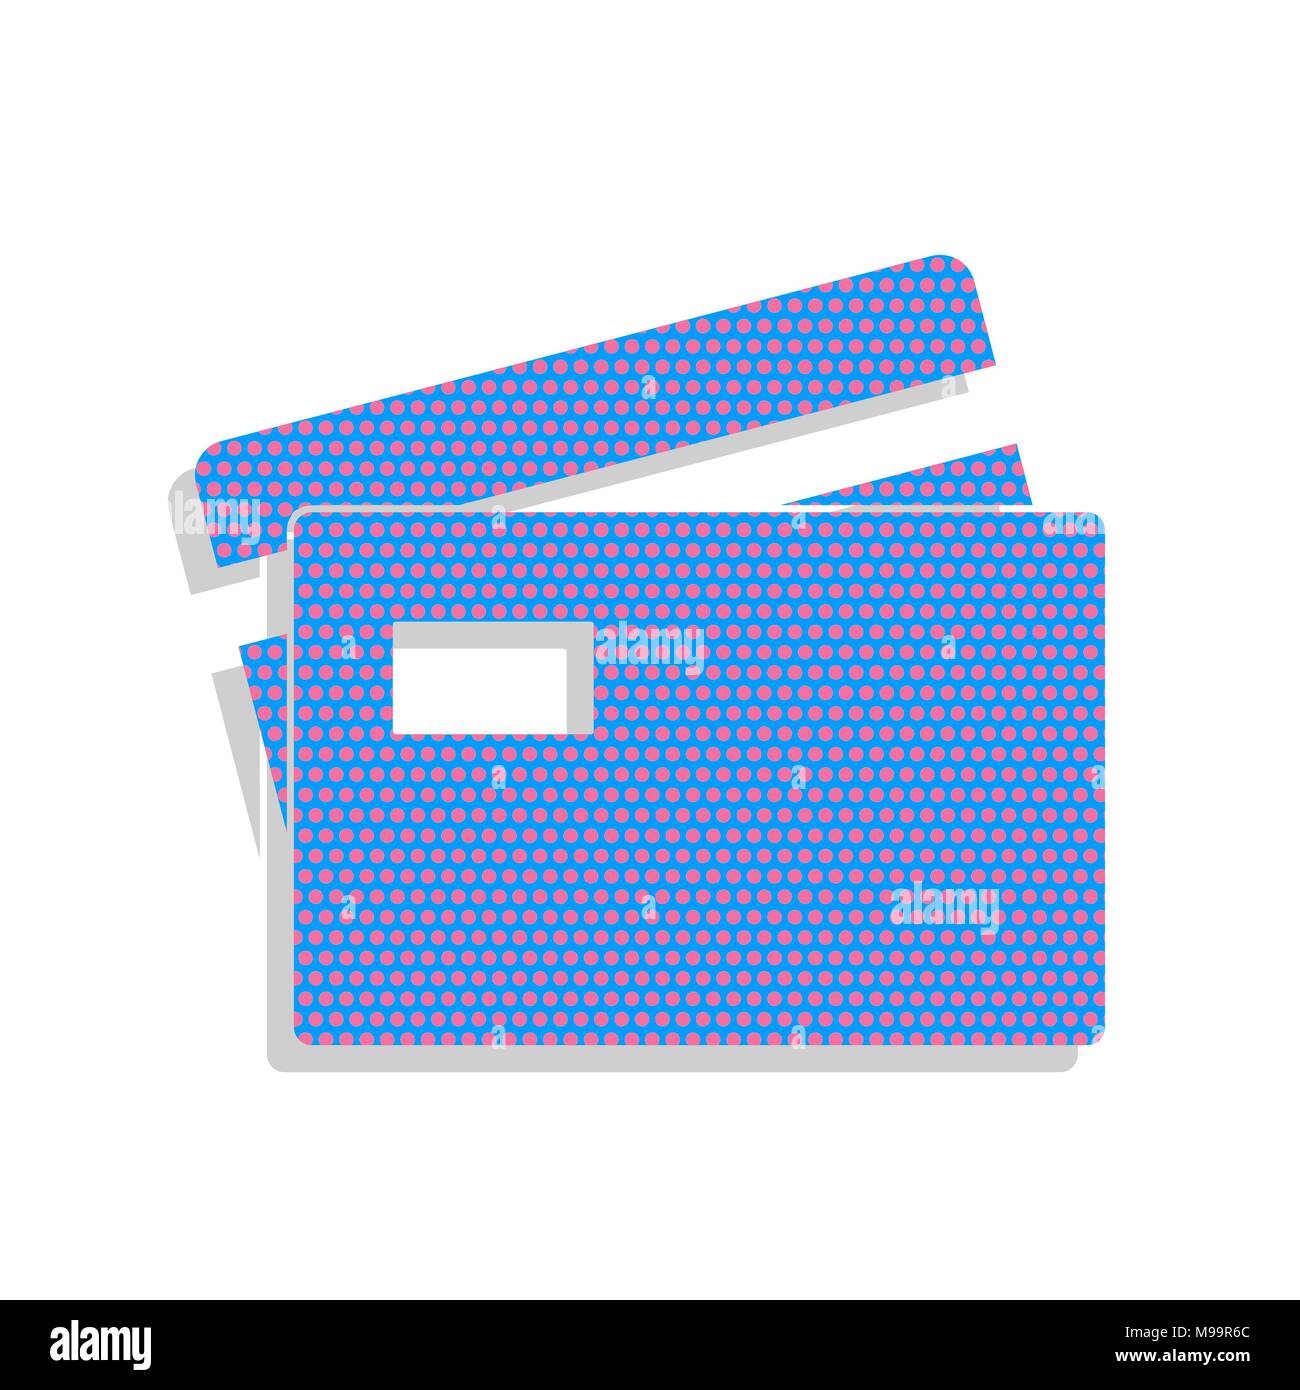 Credit Card sign. Vector. Neon blue icon with cyclamen polka dots pattern with light gray shadow on white background. Isolated. Stock Vector